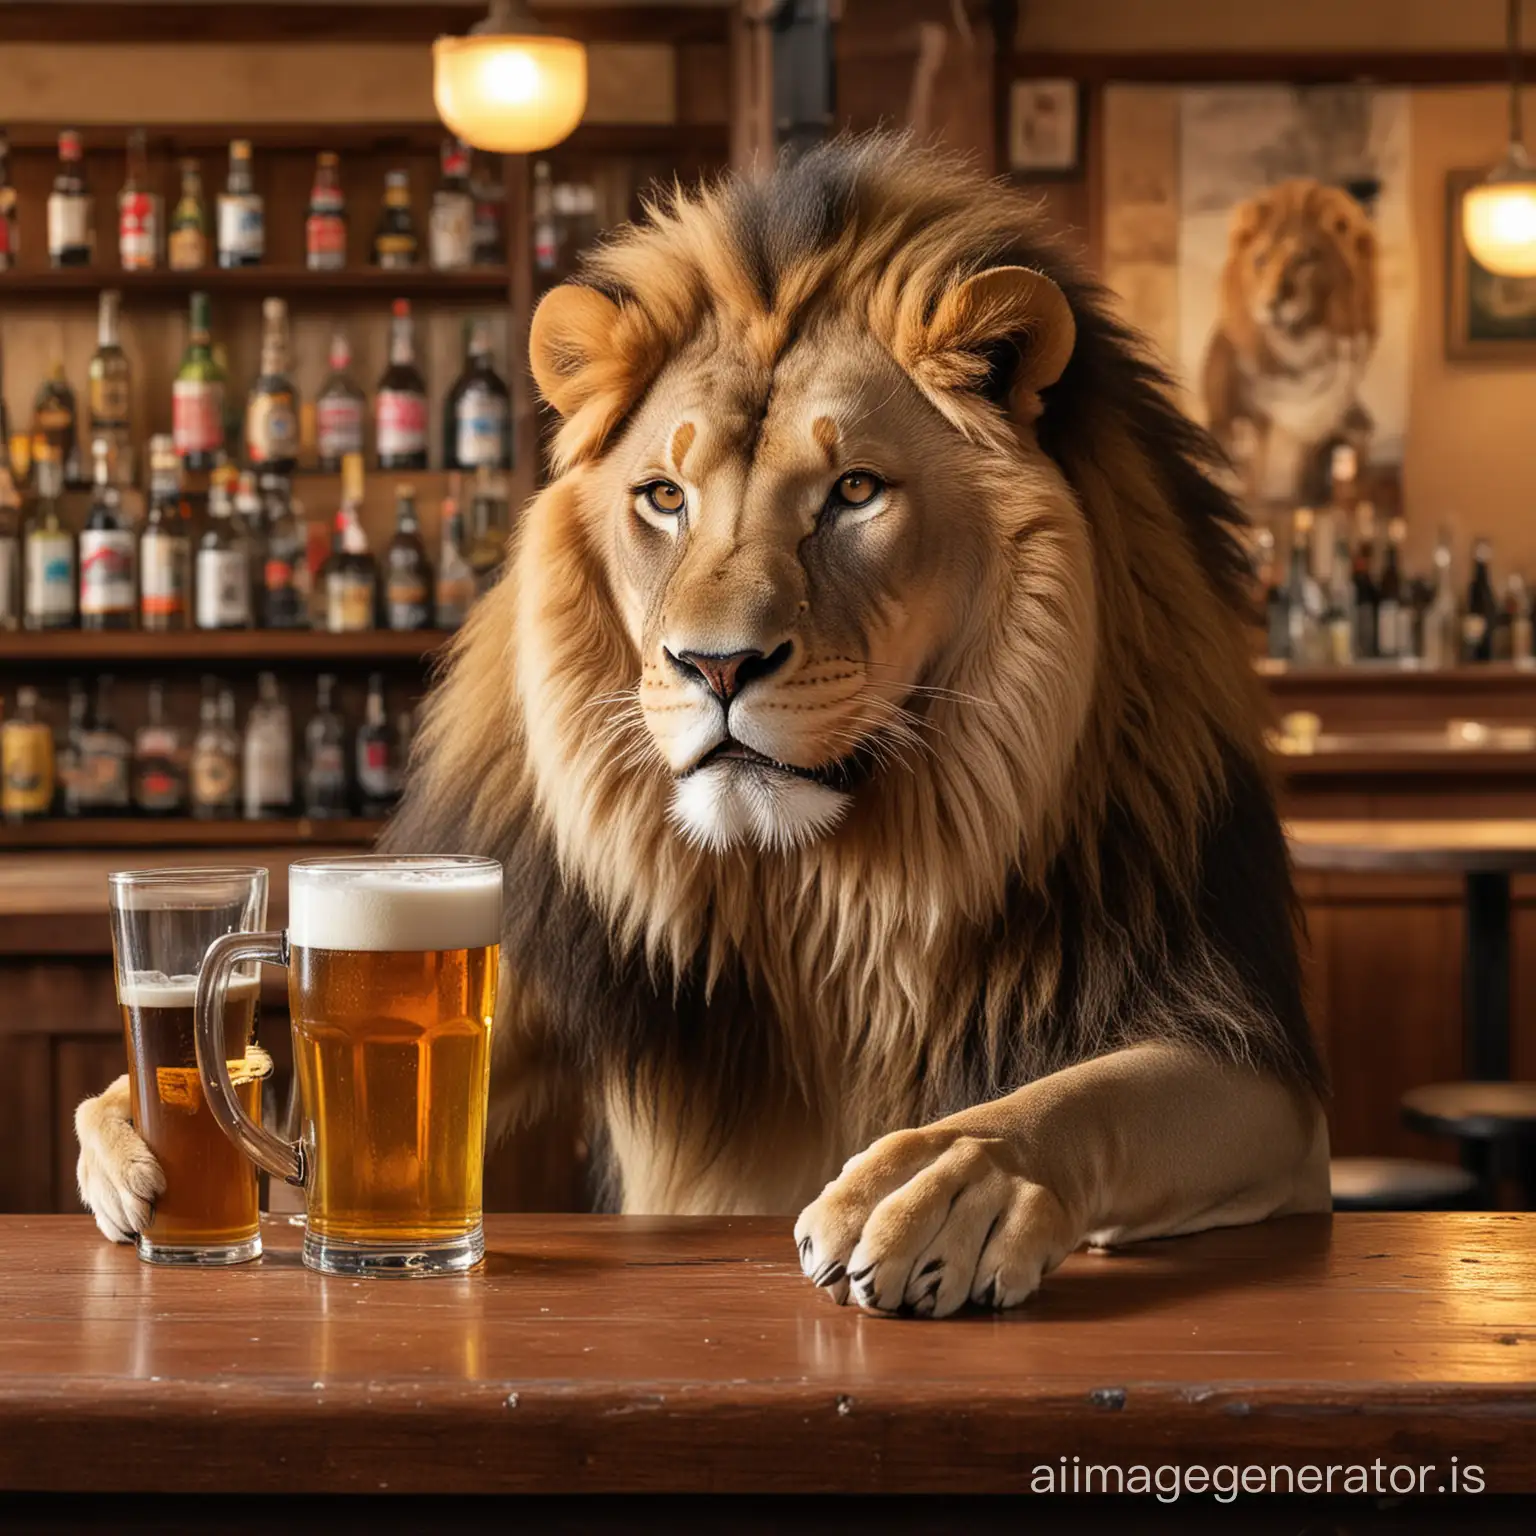 lion drinking beer in a bar